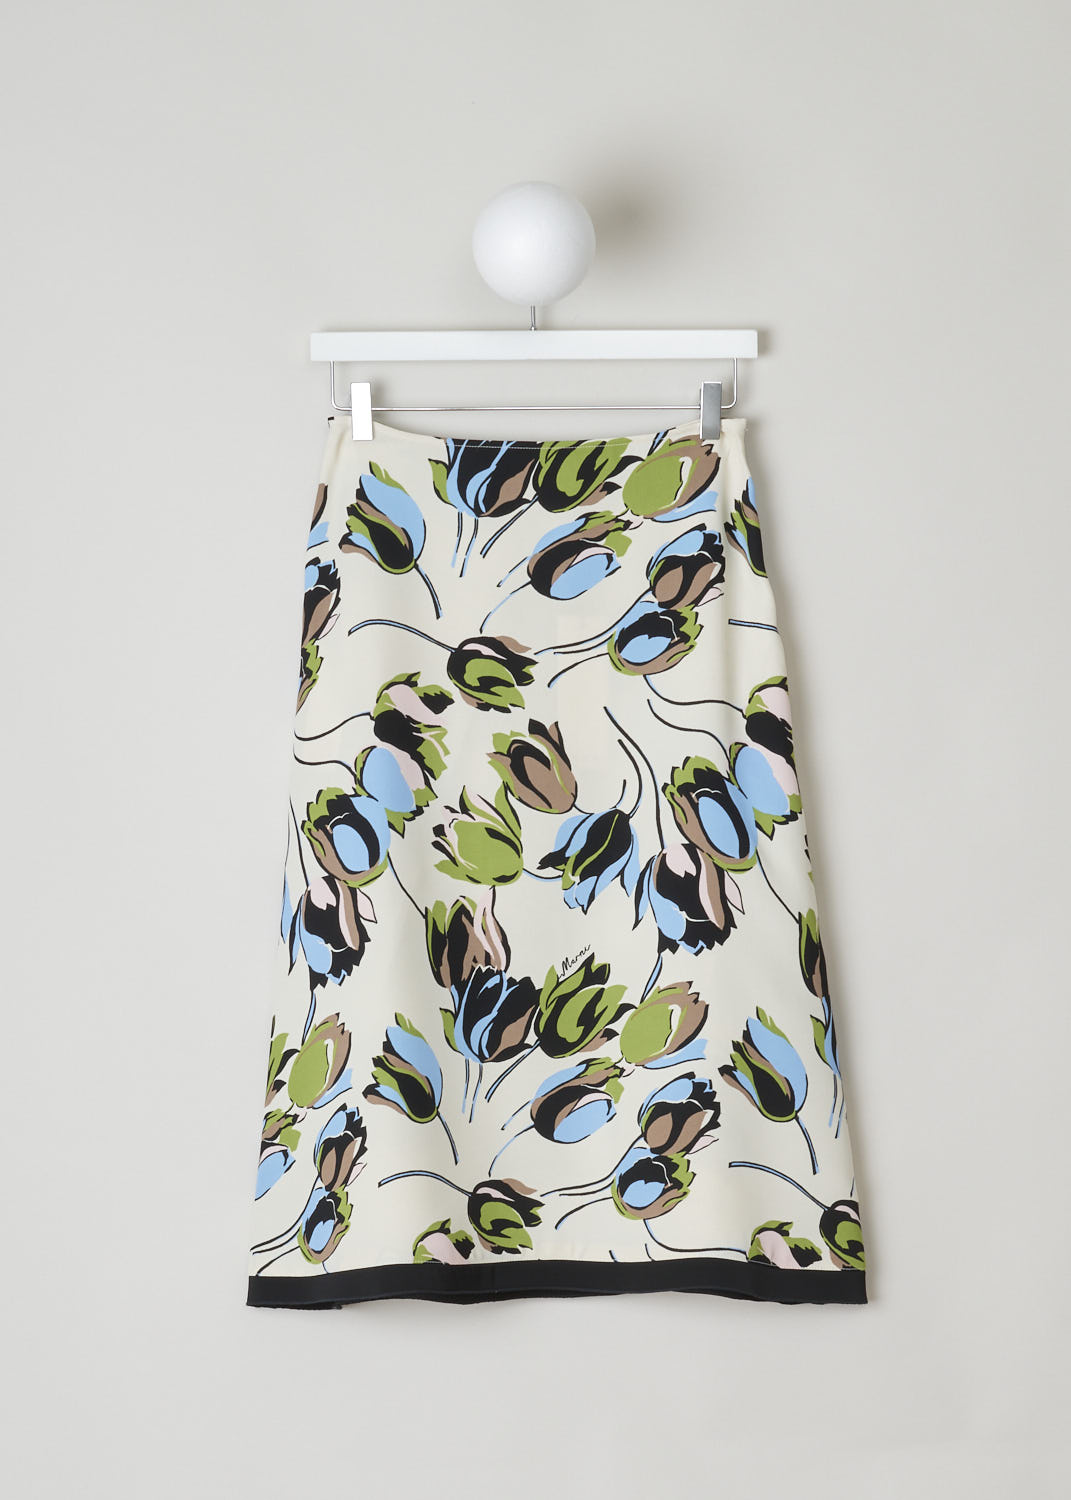 MARNI, CREAM COLORED A-LINE MIDI SKIRT, GOMA0042Q0_UTV844_WIW03, Print, Front, This cream colored A-line skirt has a floral print in blues and greens. A concealed side zip functions as the closing option. The skirt has a black satin hemline. 
